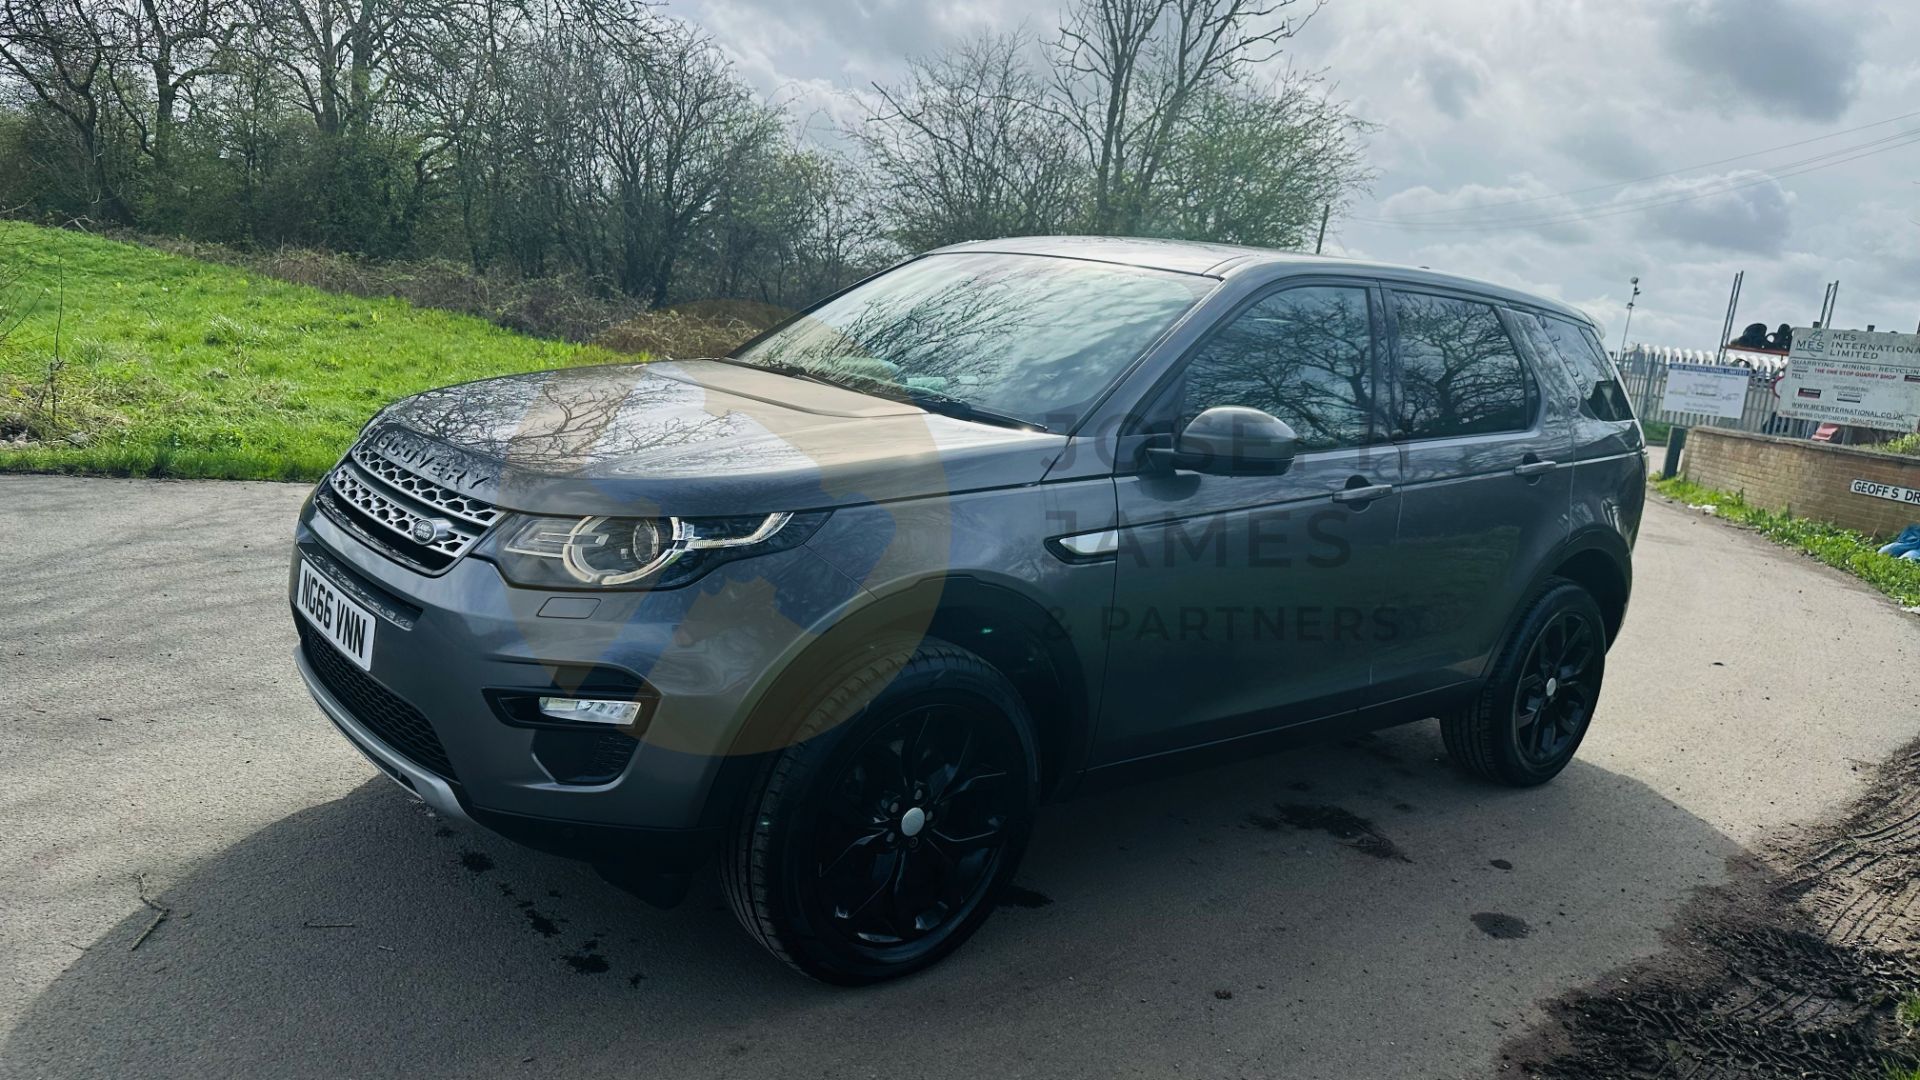 (On Sale) LAND ROVER DISCOVERY SPORT *HSE EDITION* 7 SEATER SUV (2017 - EURO 6) 2.0 TD4 - AUTOMATIC - Image 6 of 48